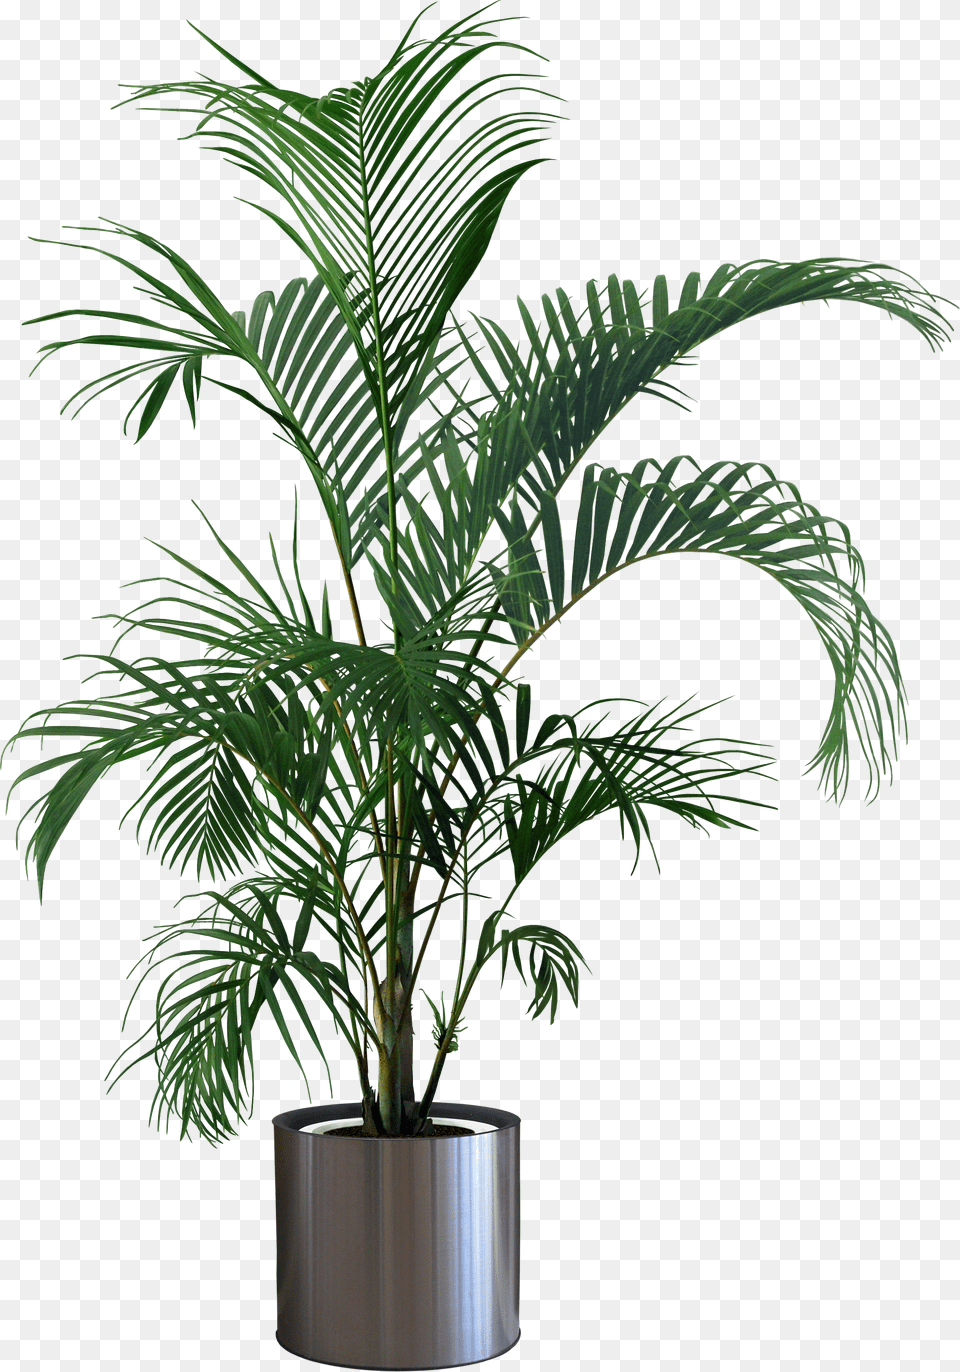 Plants Plant Flowerpot Gardening Houseplant Indoor Background Potted Plant, Jar, Palm Tree, Planter, Potted Plant Free Transparent Png